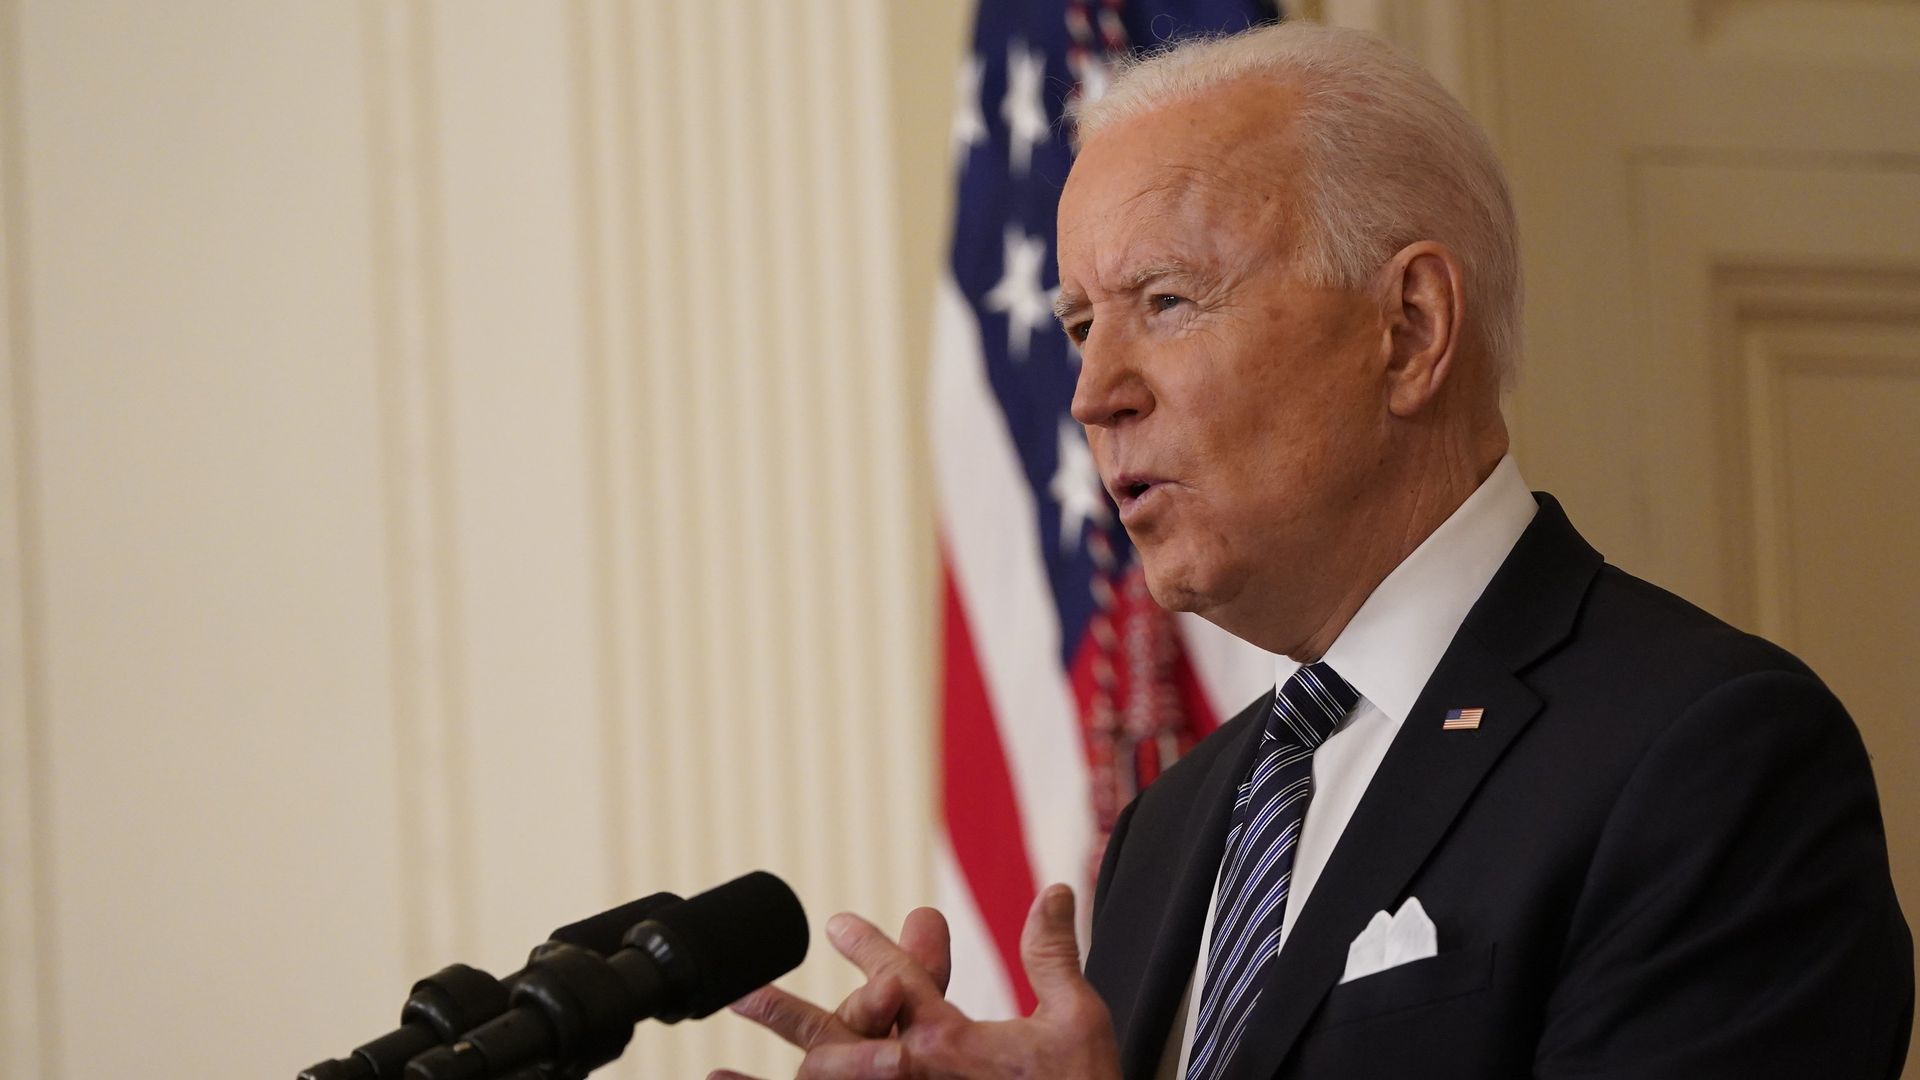 “Biden to Address Nation Following Negative Covid Test, Unveil Agenda for Rest of Term”